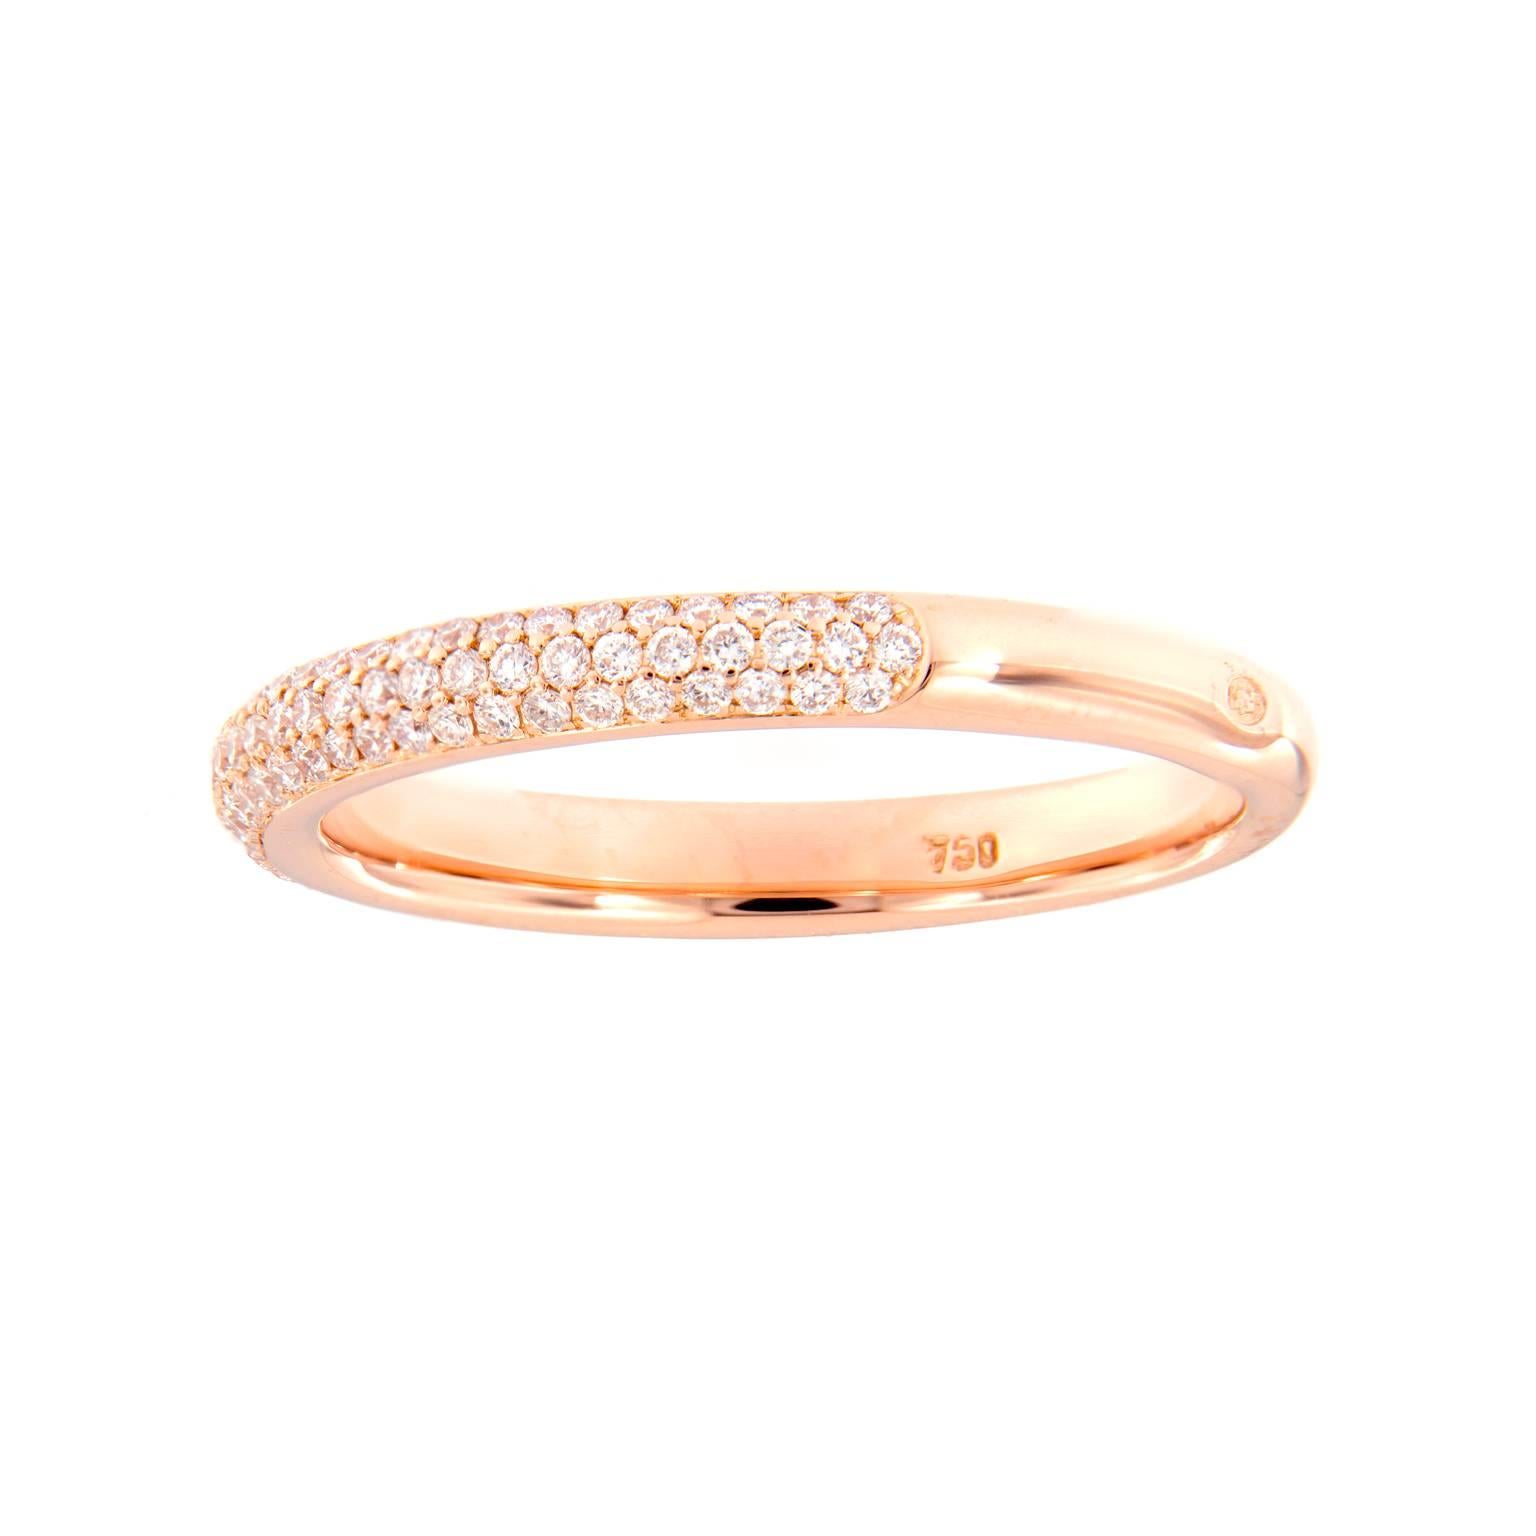 This delicately crafted 18k rose gold wedding anniversary band ring features three rows of pavé set diamonds that weigh a total of 0.58 cttw. 
Ring size 6. Weighs 3.1 grams. 

Diamond 0.58 cttw